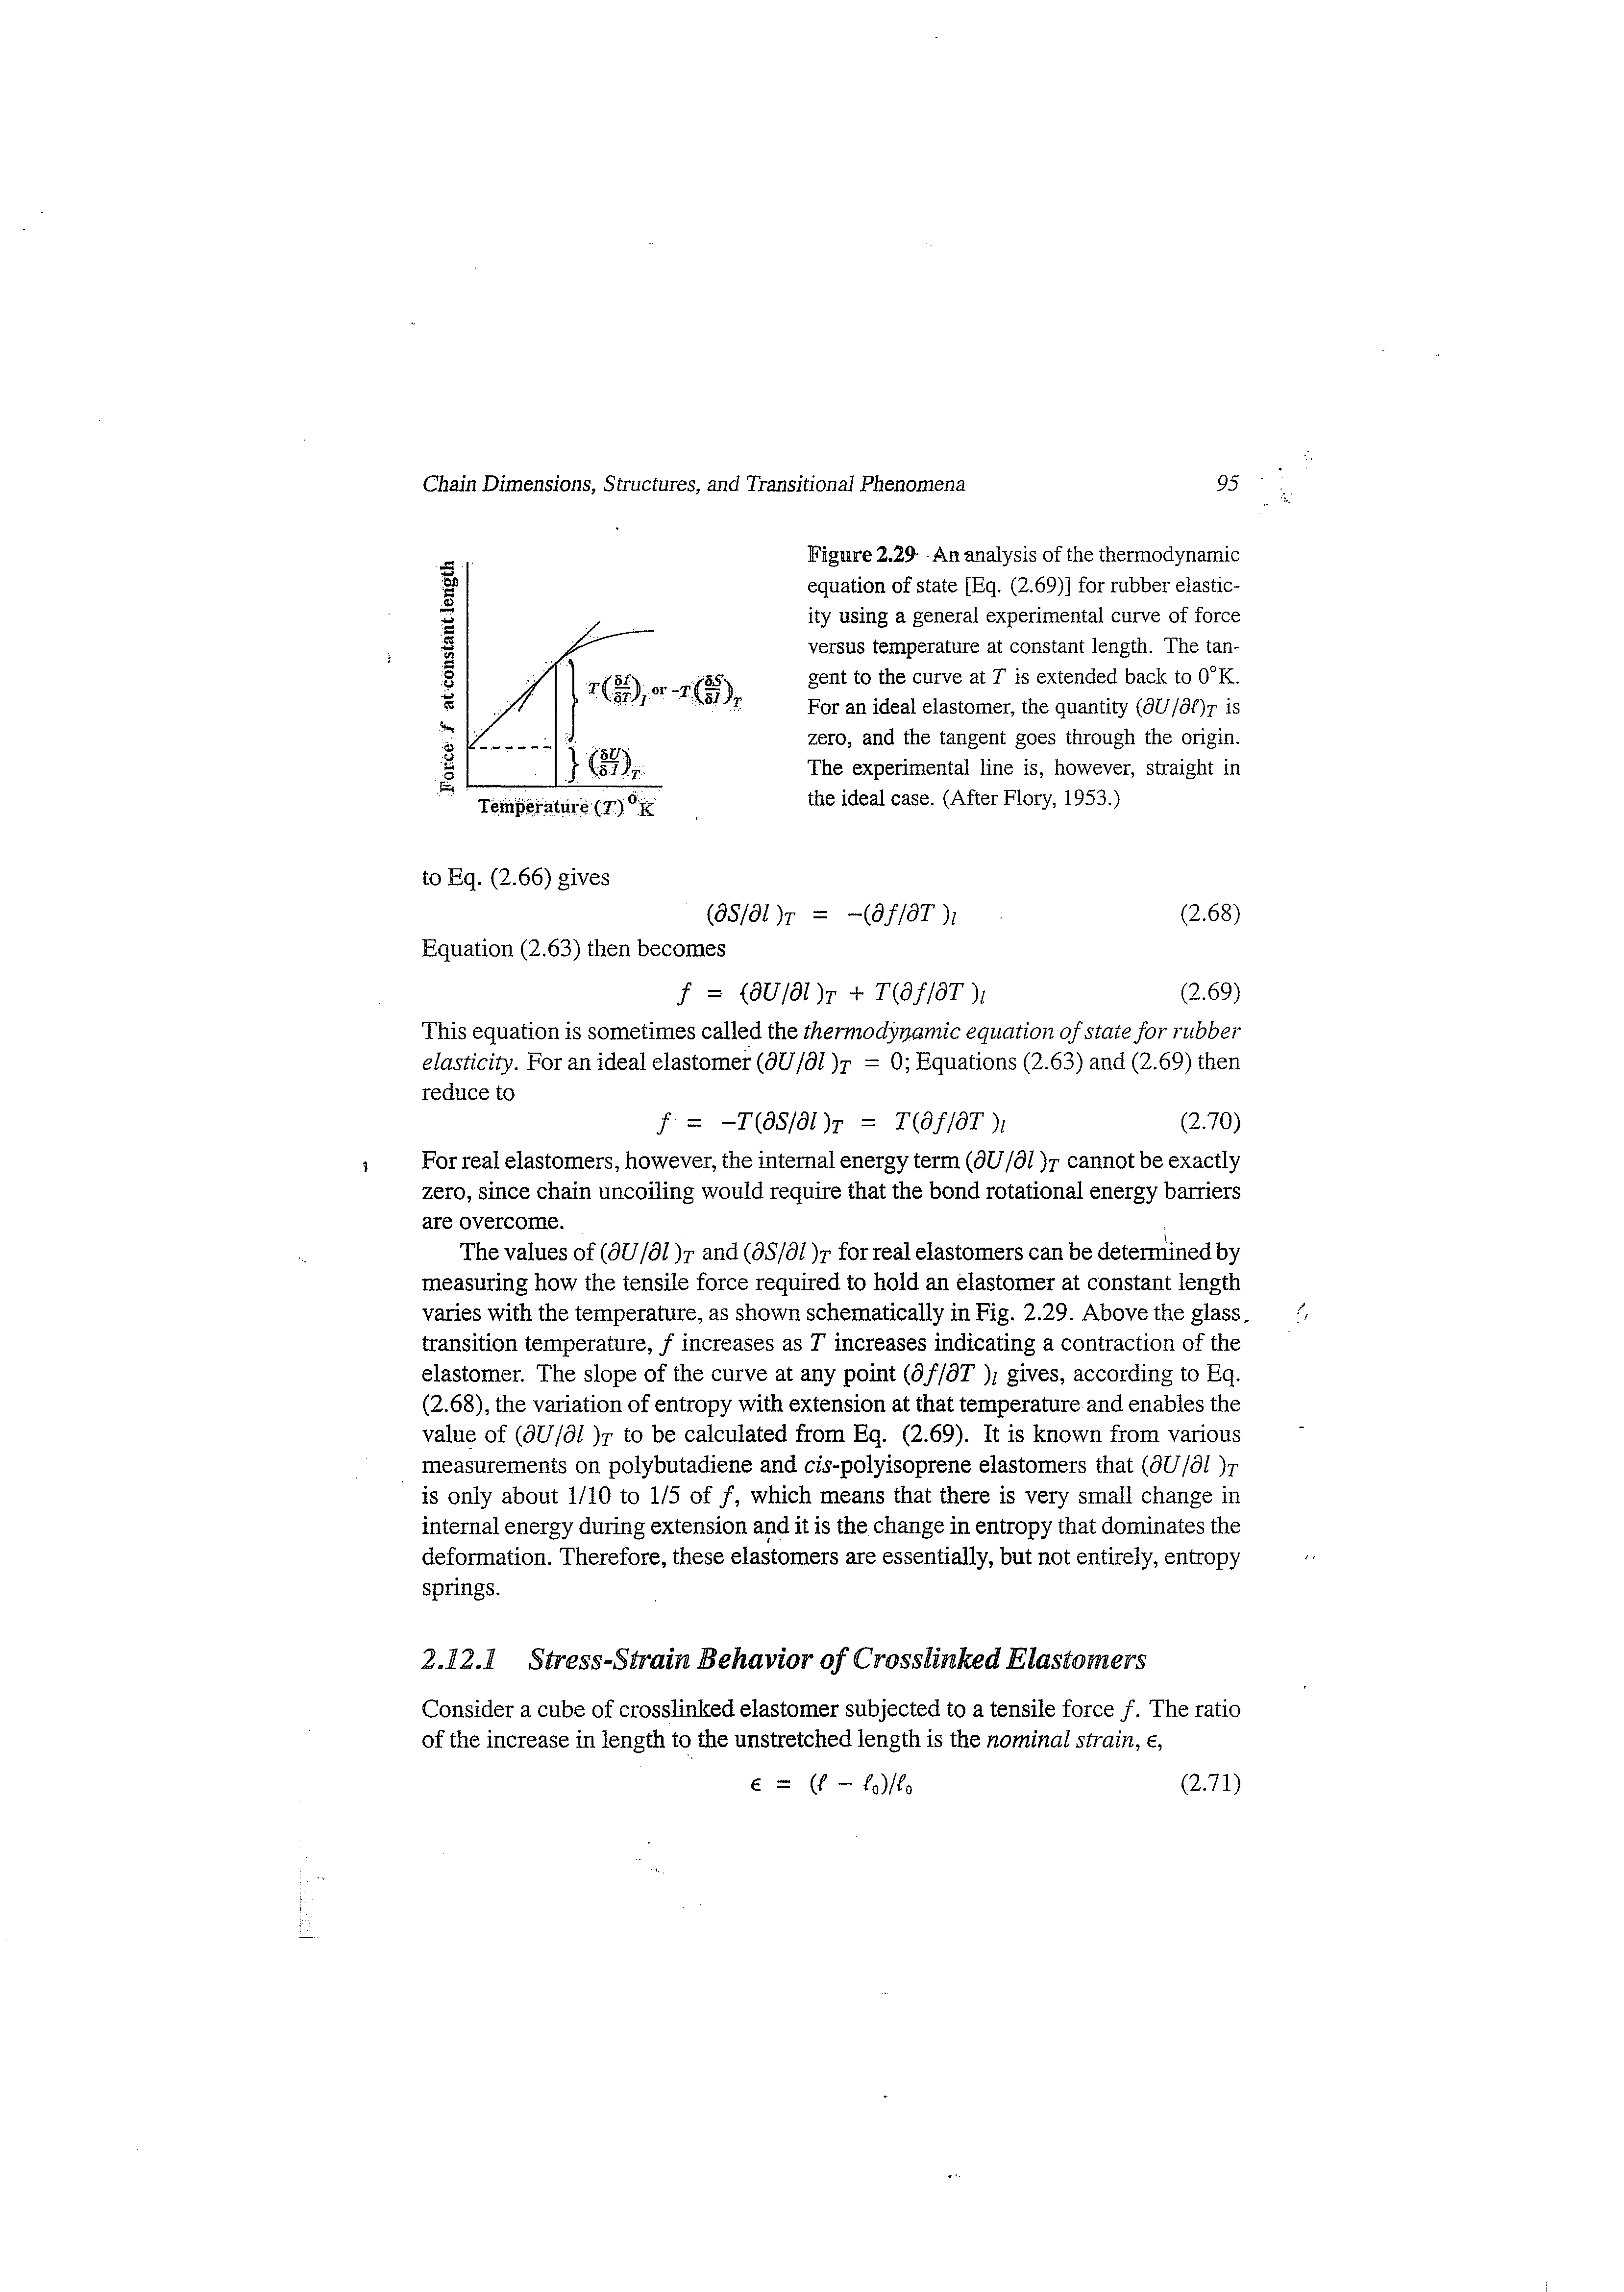 Figure 2.29- - An analysis of the thermodynamic equation of state [Eq. (2.69)] for rubber elasticity using a general experimental curve of force versus temperature at constant length. The tangent to the curve at T is extended back to 0°K. For an ideal elastomer, the quantity (dU/df)r is zero, and the tangent goes through the origin. The experimental line is, however, straight in the ideal case. (After Flory, 1953.)...